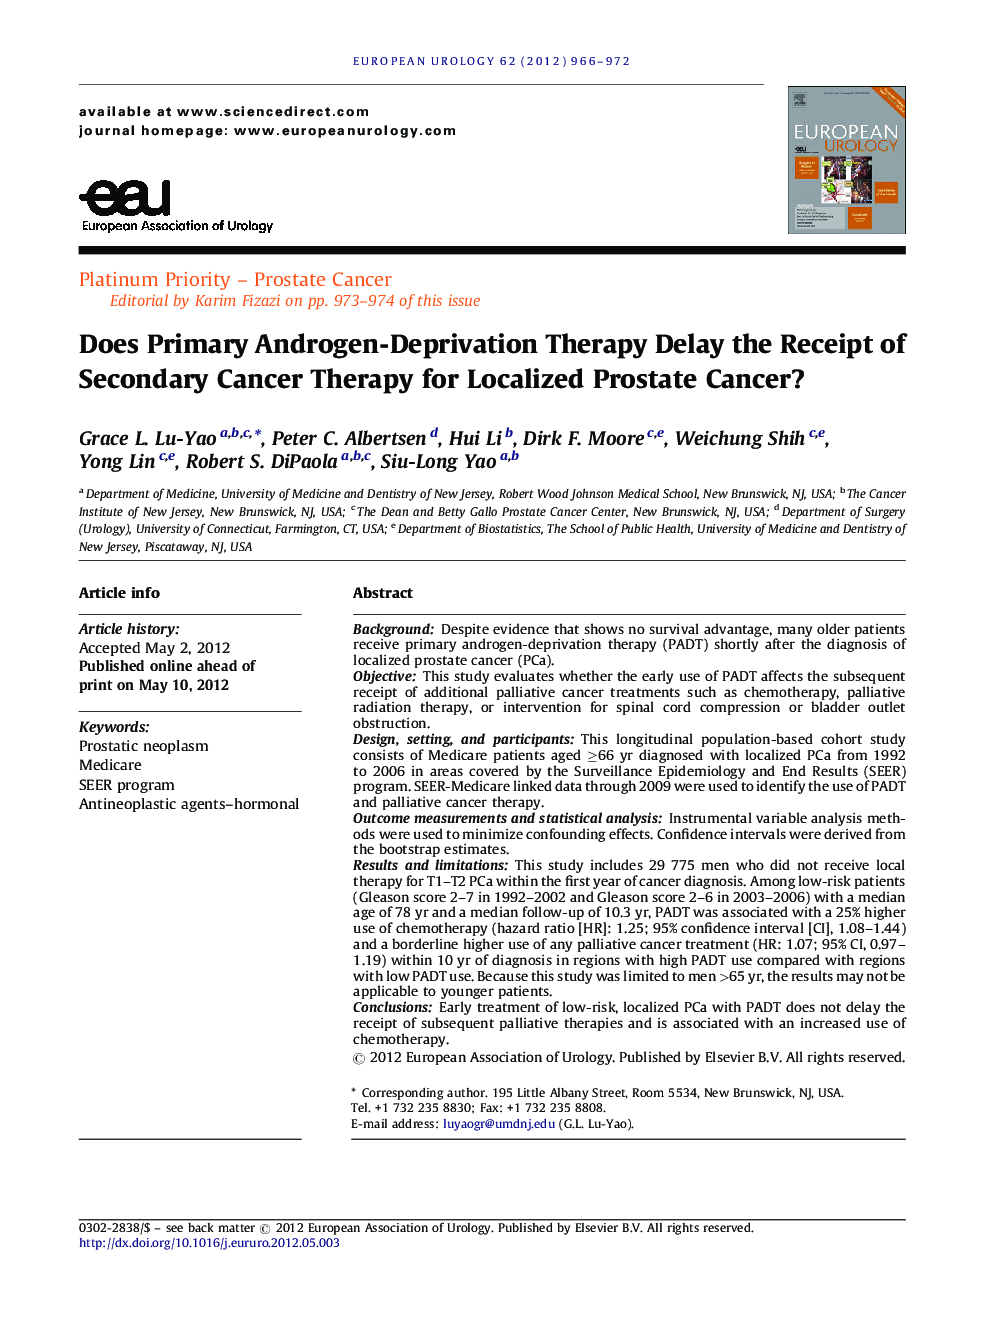 Does Primary Androgen-Deprivation Therapy Delay the Receipt of Secondary Cancer Therapy for Localized Prostate Cancer?